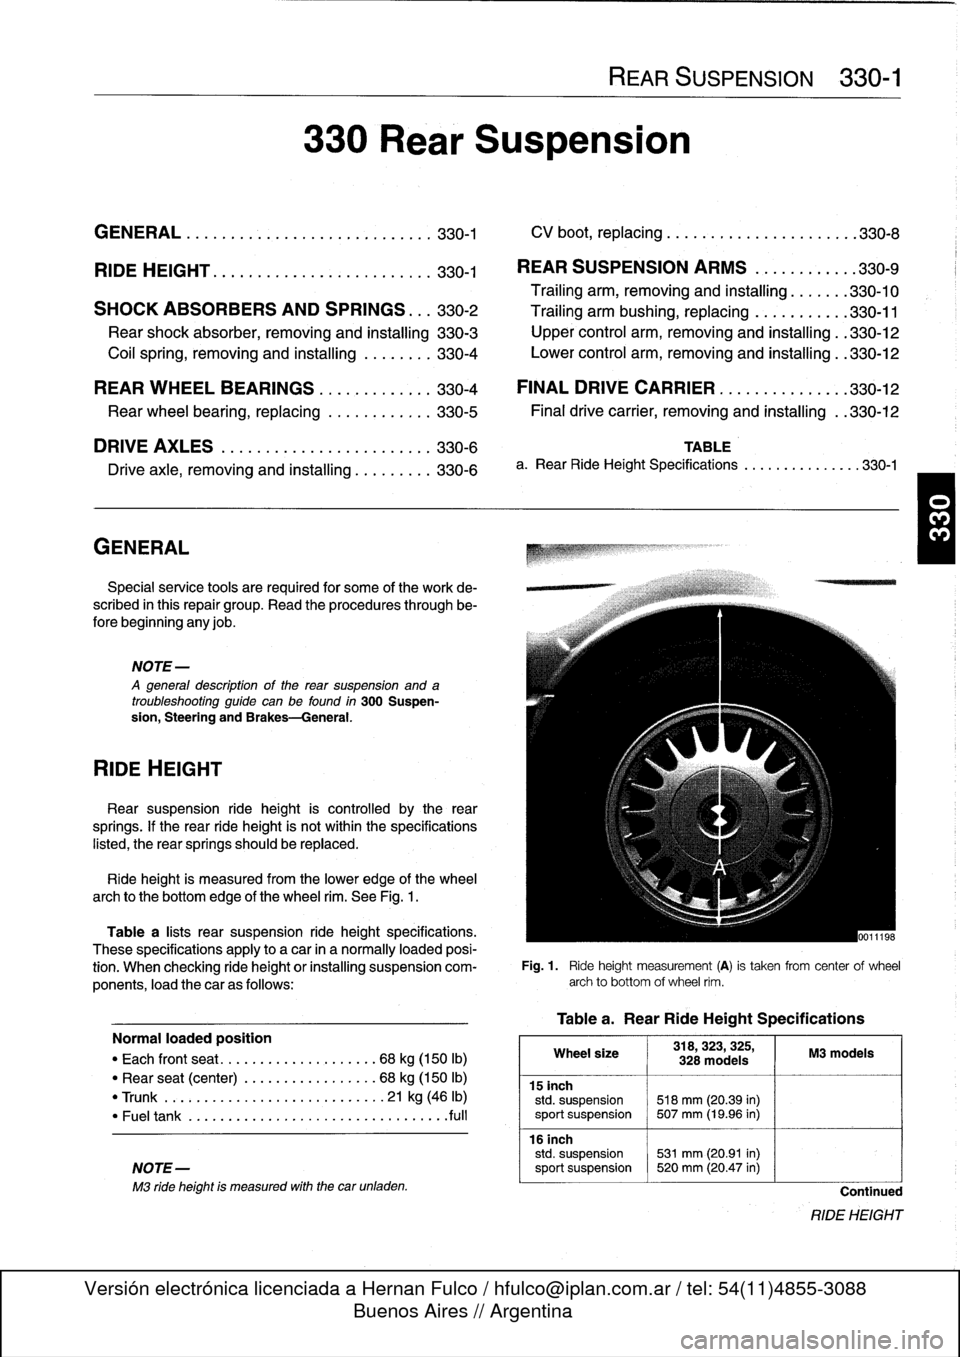 BMW 328i 1995 E36 Workshop Manual 
GENERAL
.......
.
.
.
.
.
.
.
.
.
.......
.
...
.330-1

	

CV
boot,
replacing
........
.
.
.
.........
.
.330-8

RIDE
HEIGHT
....
.
.
.
.
.
...
.
...
.
.
.
.
.
...
.
330-1

	

REAR
SUSPENSION
ARMS
.
